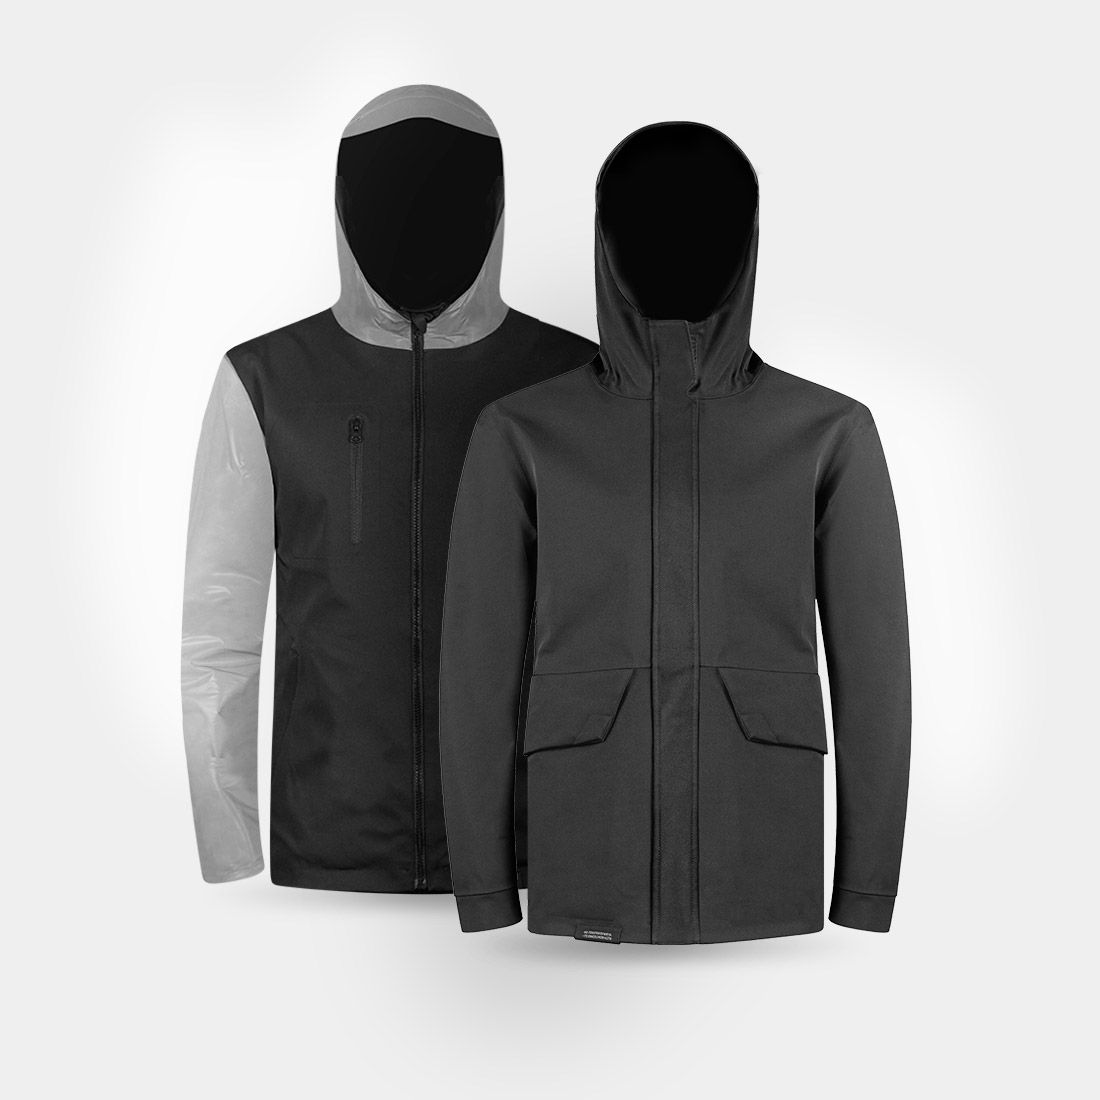 THE CITYLIGHT - Reversible and reflective jacket